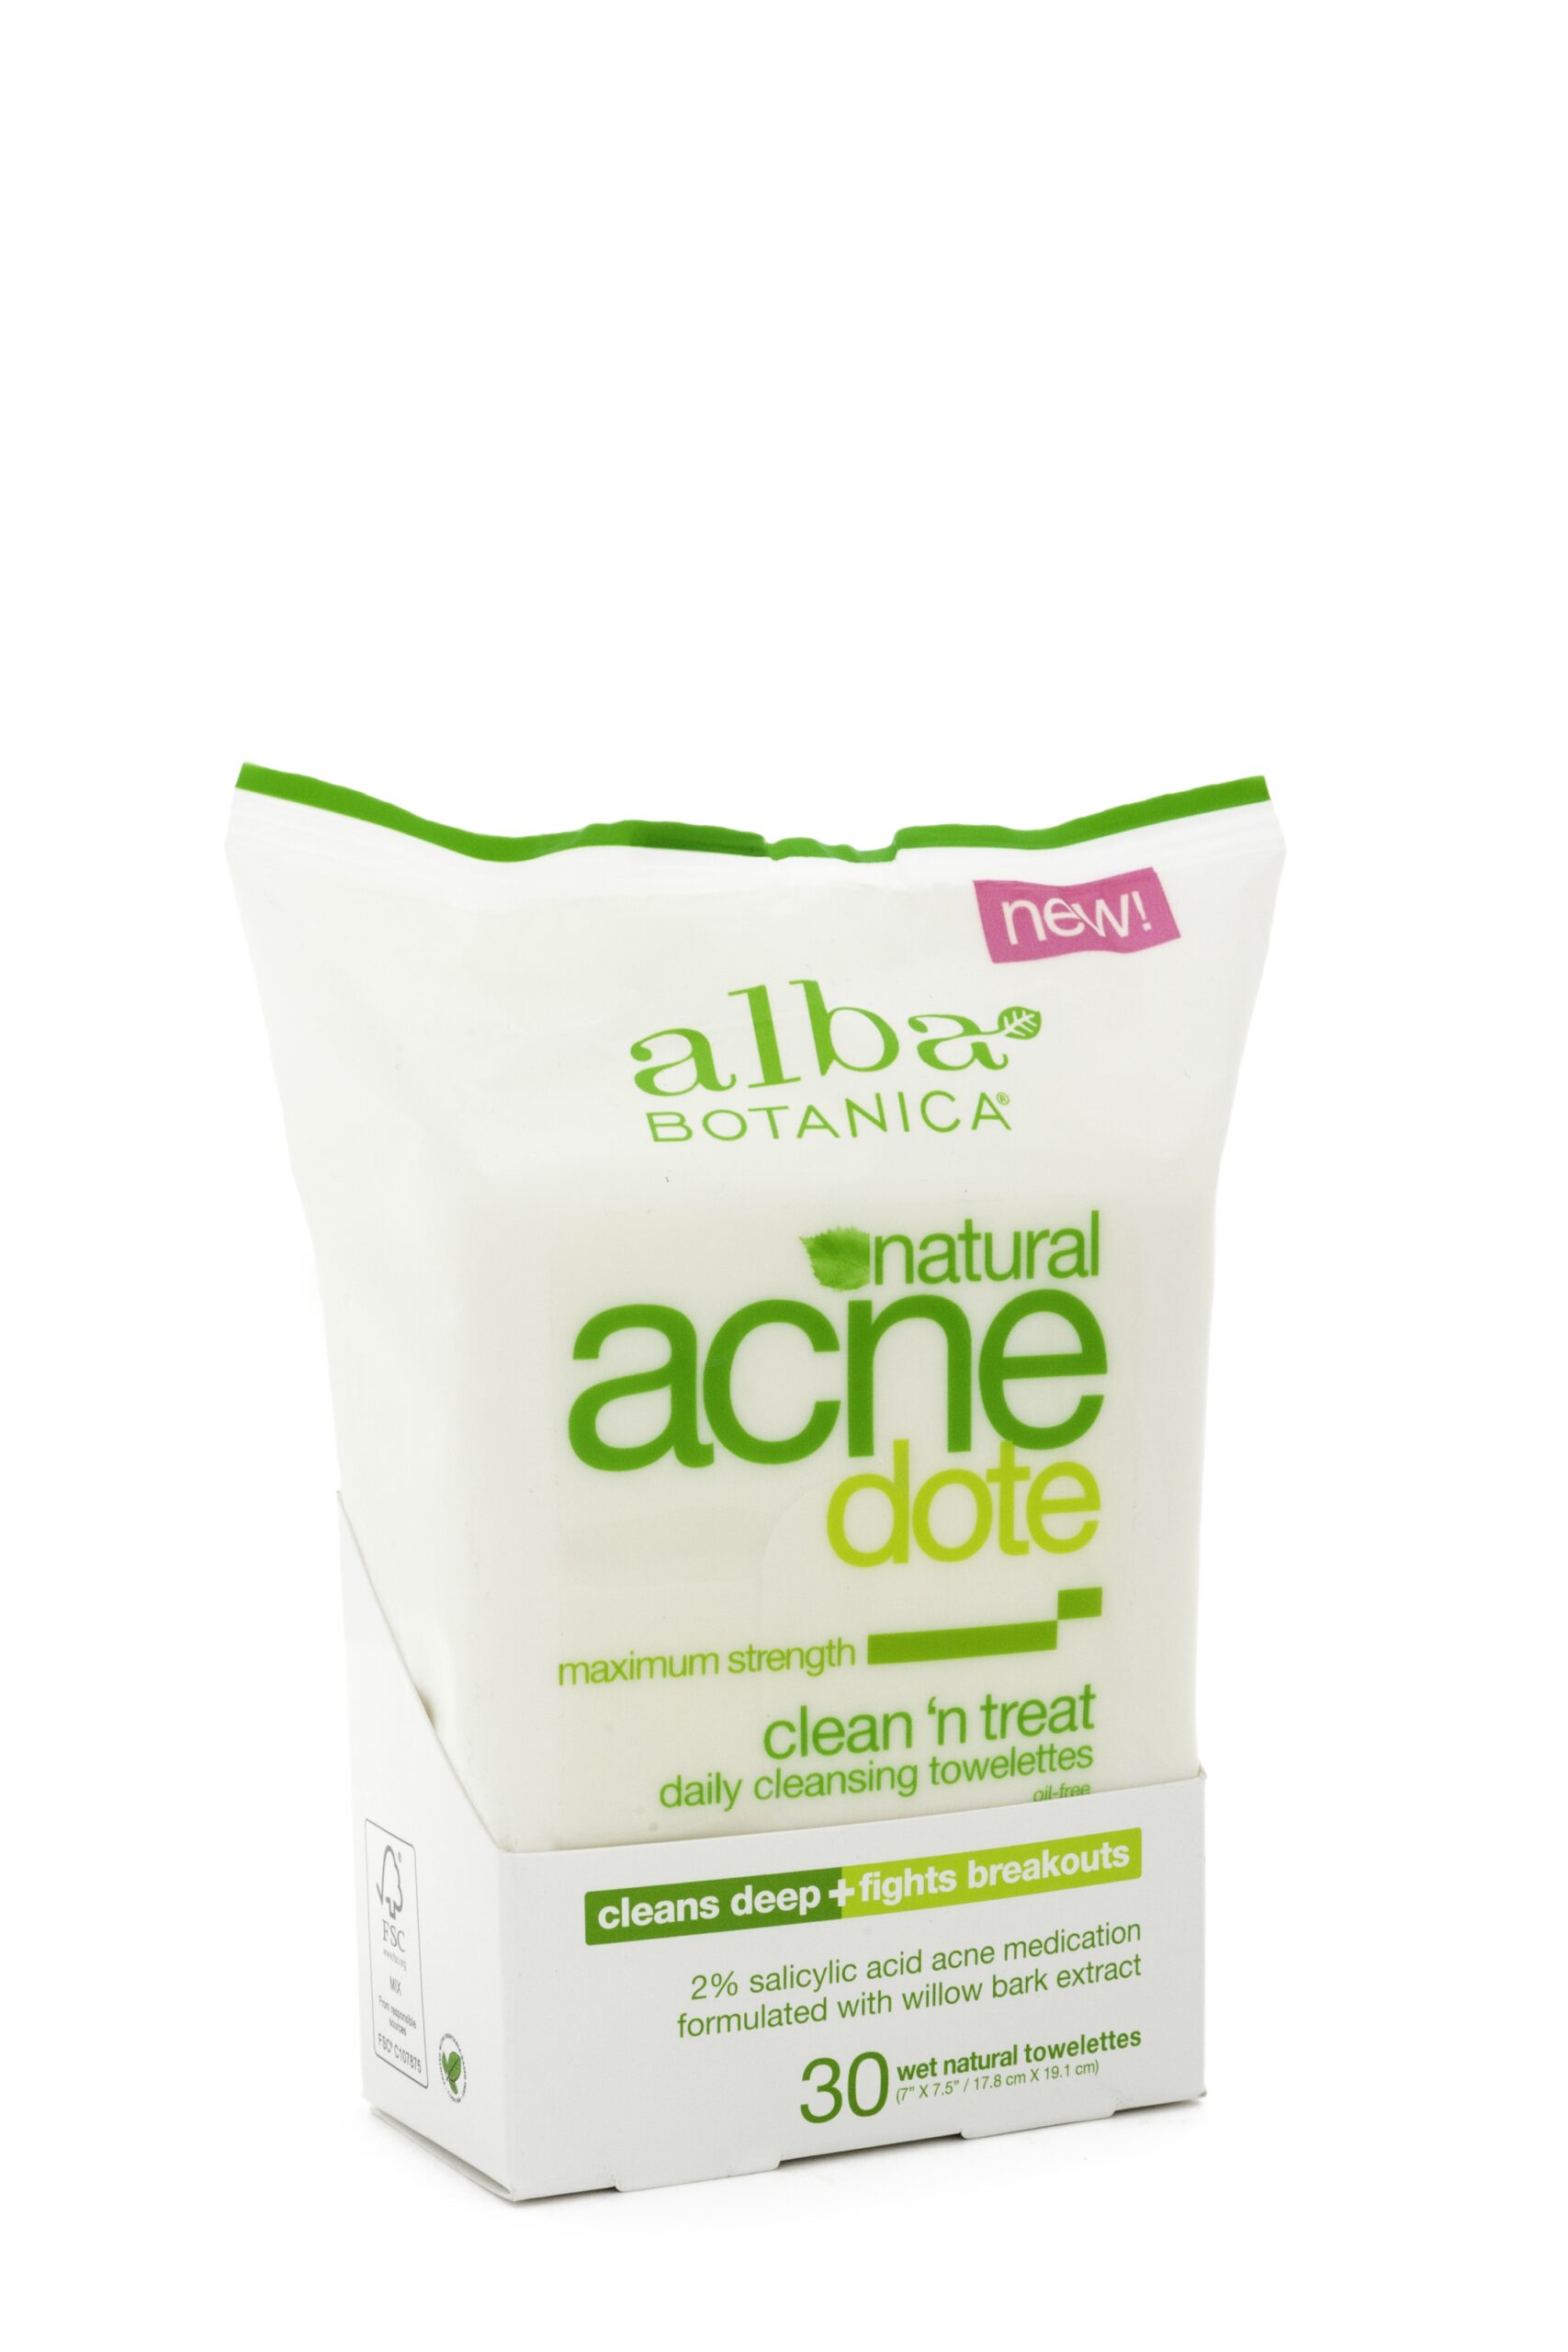 How To Choose The Best Acne Care A Coupon Whole Foods Market - Acne Free Coupons Printable